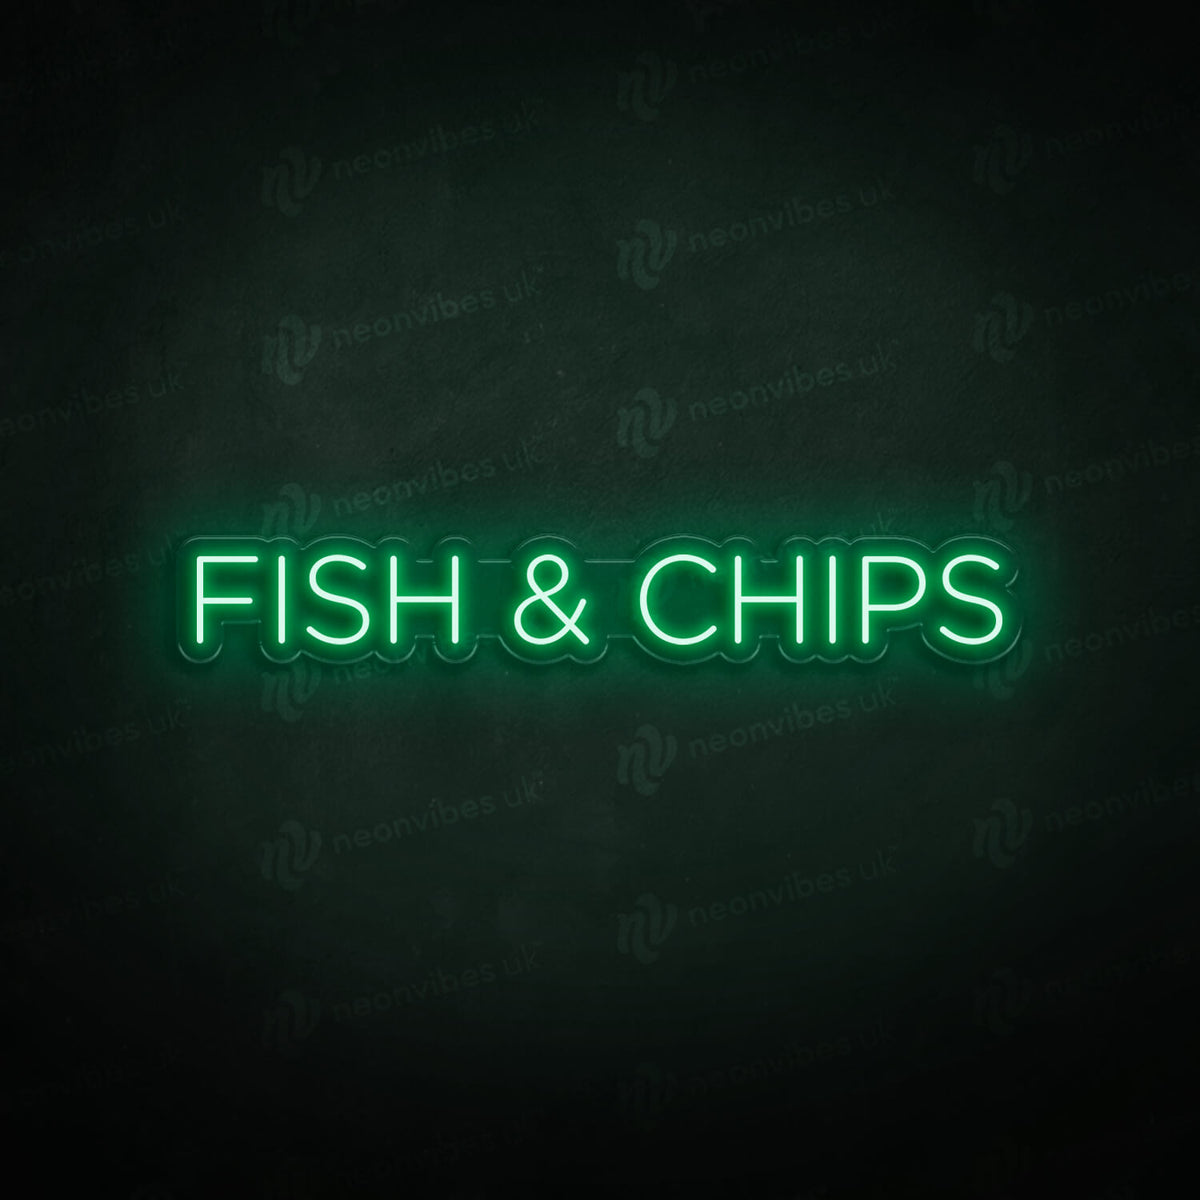 Fish &amp; Chips neon sign